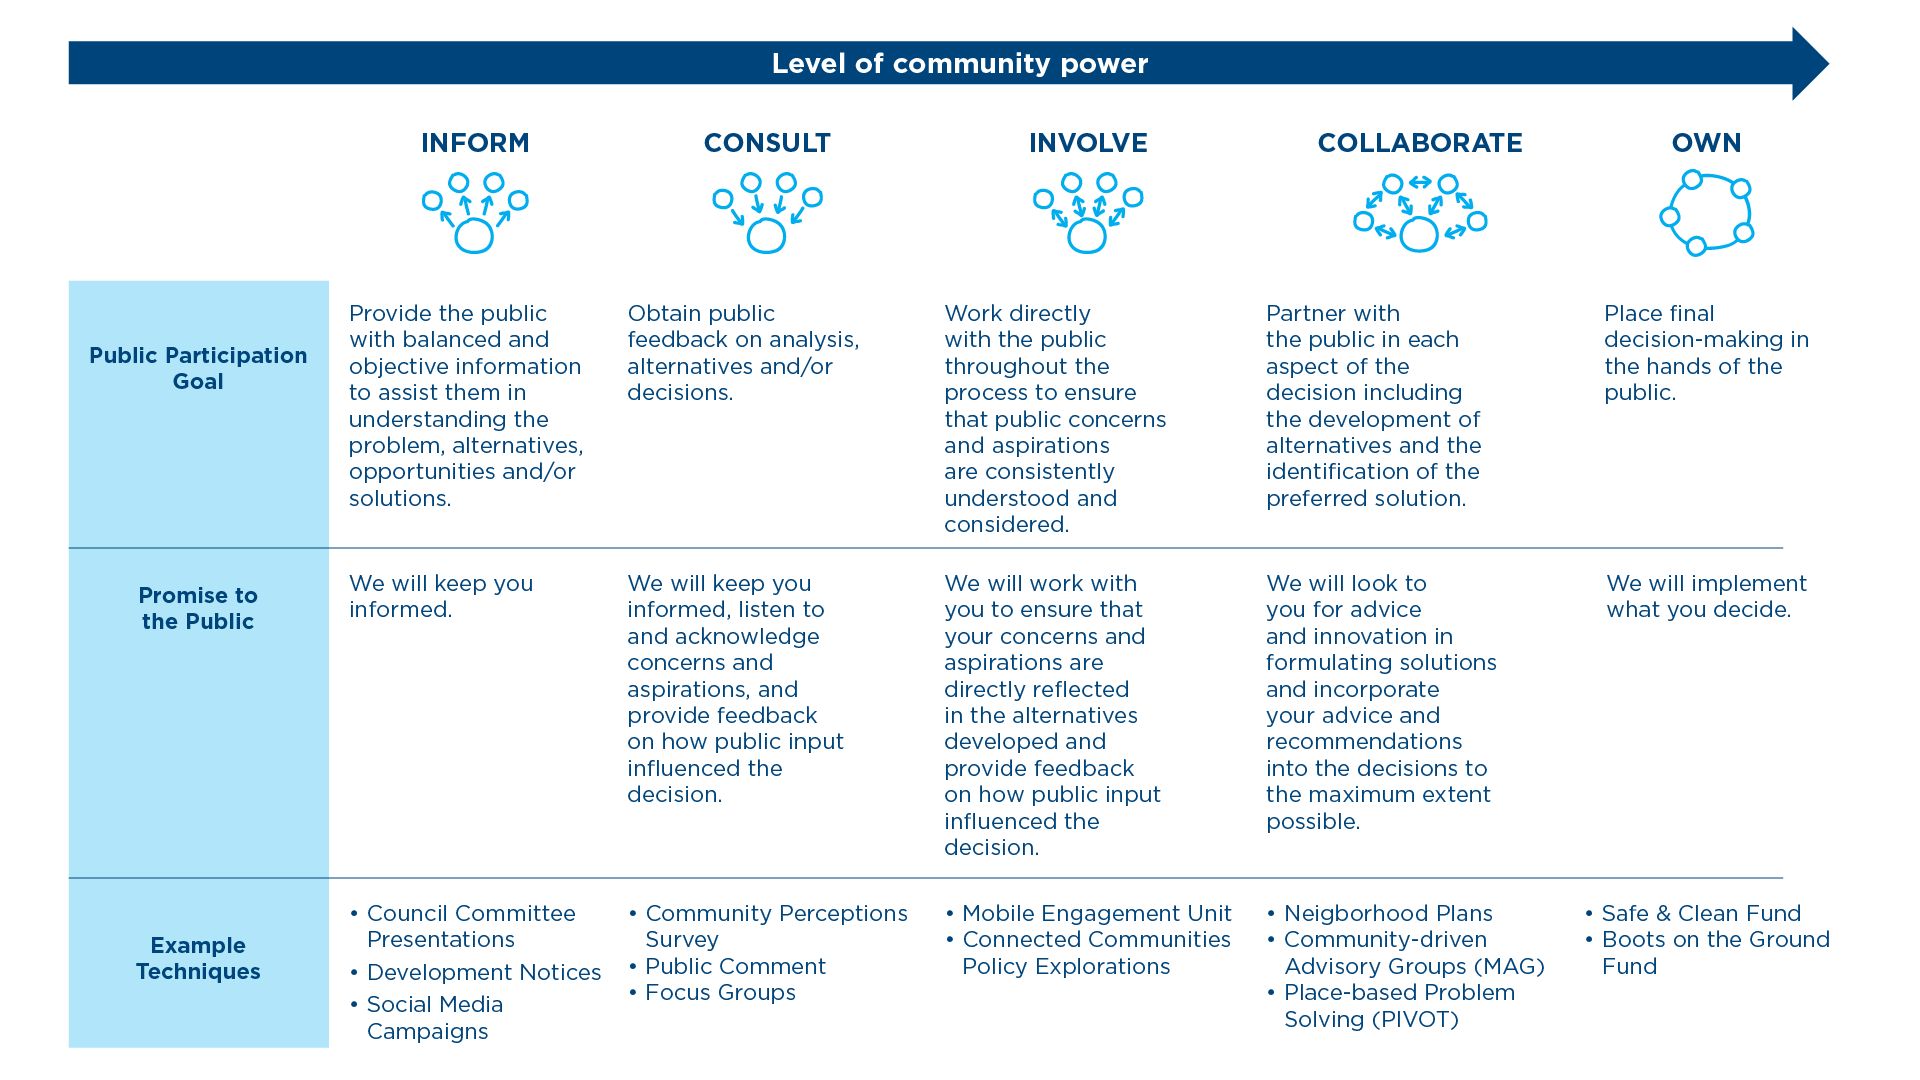 Chart showing the five different levels of community engagement, along with the public participation goal, promise to the public, and example techniques for each level.